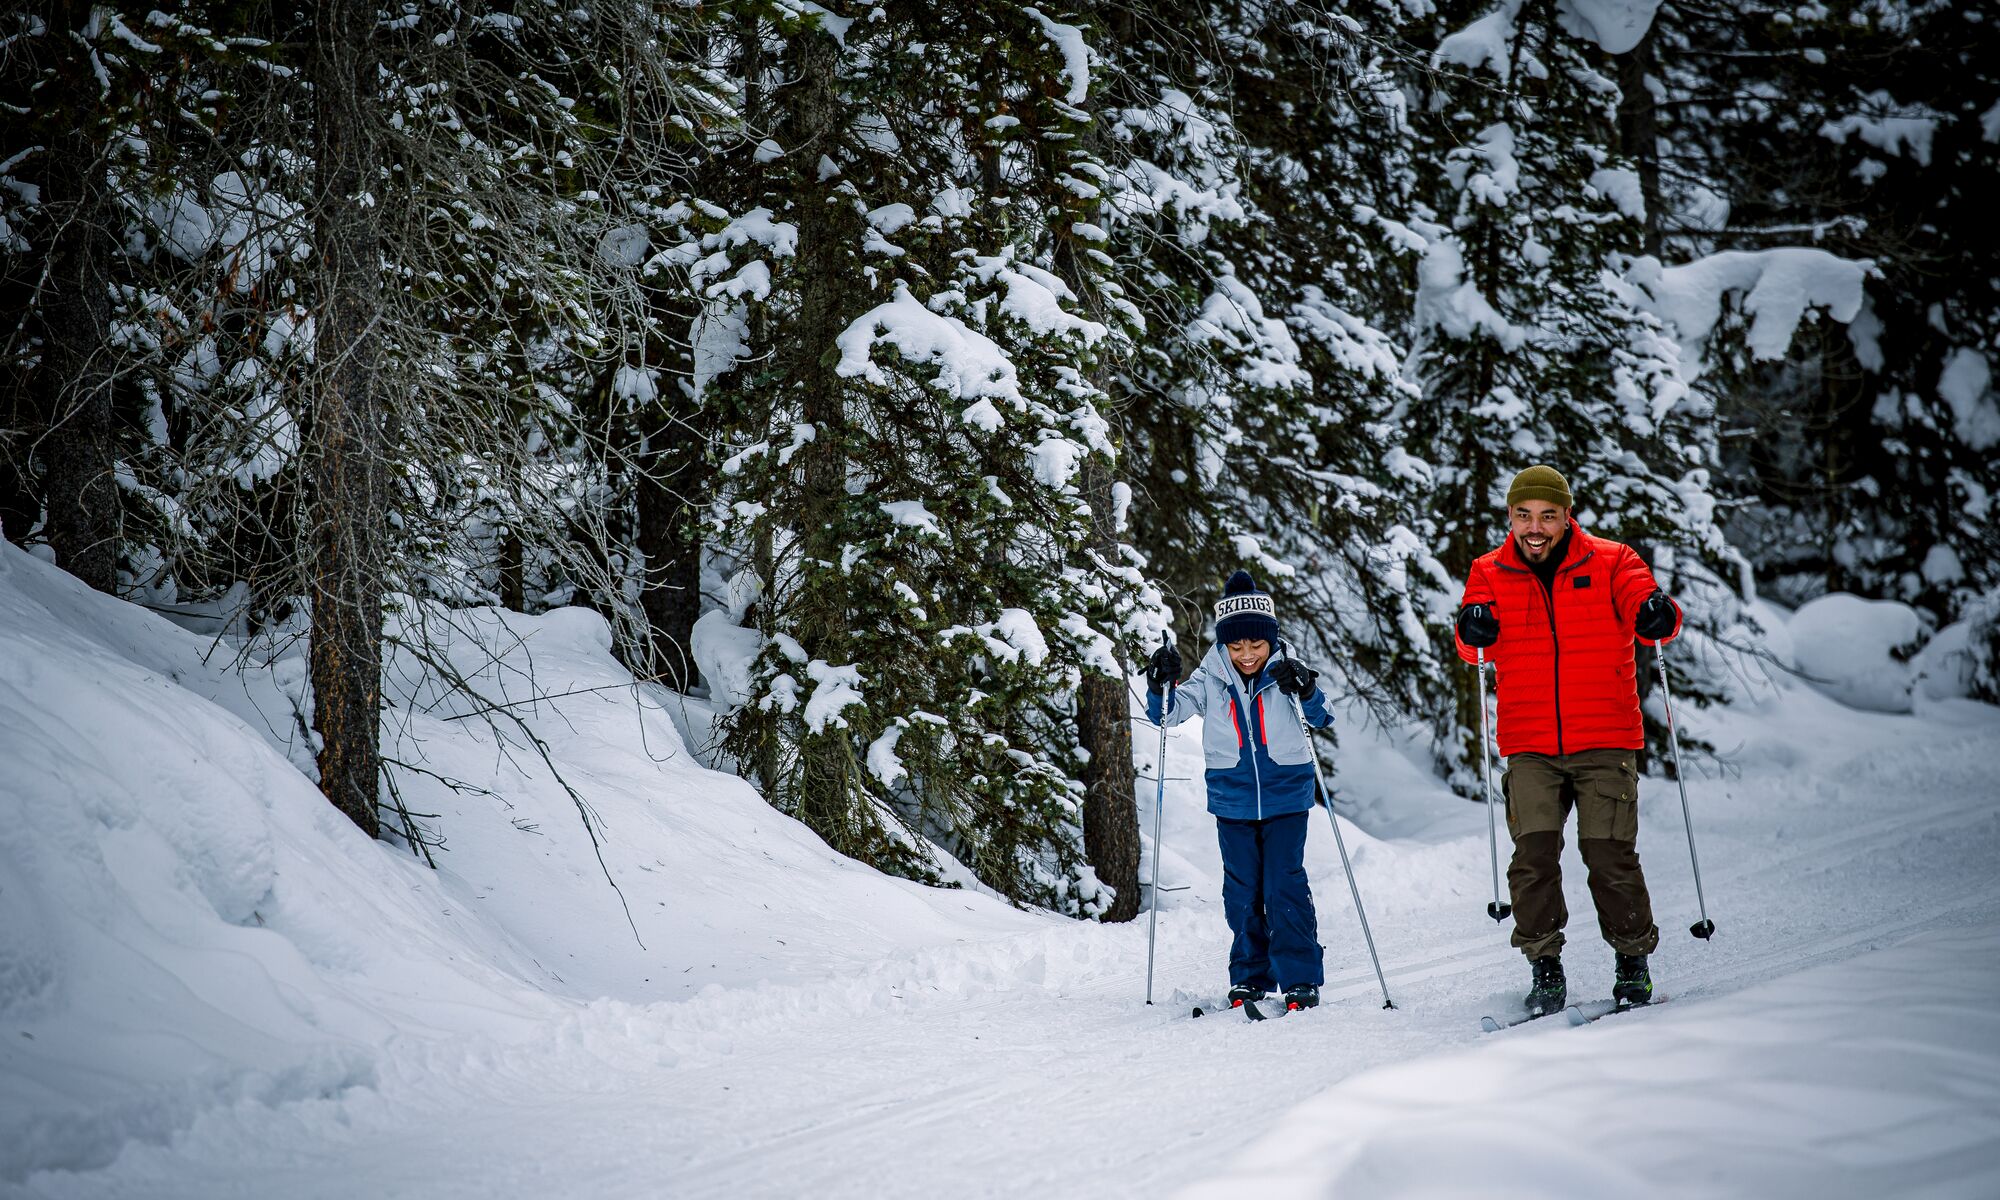 A father and son cross country skiing in Banff National Park in snowy woods.